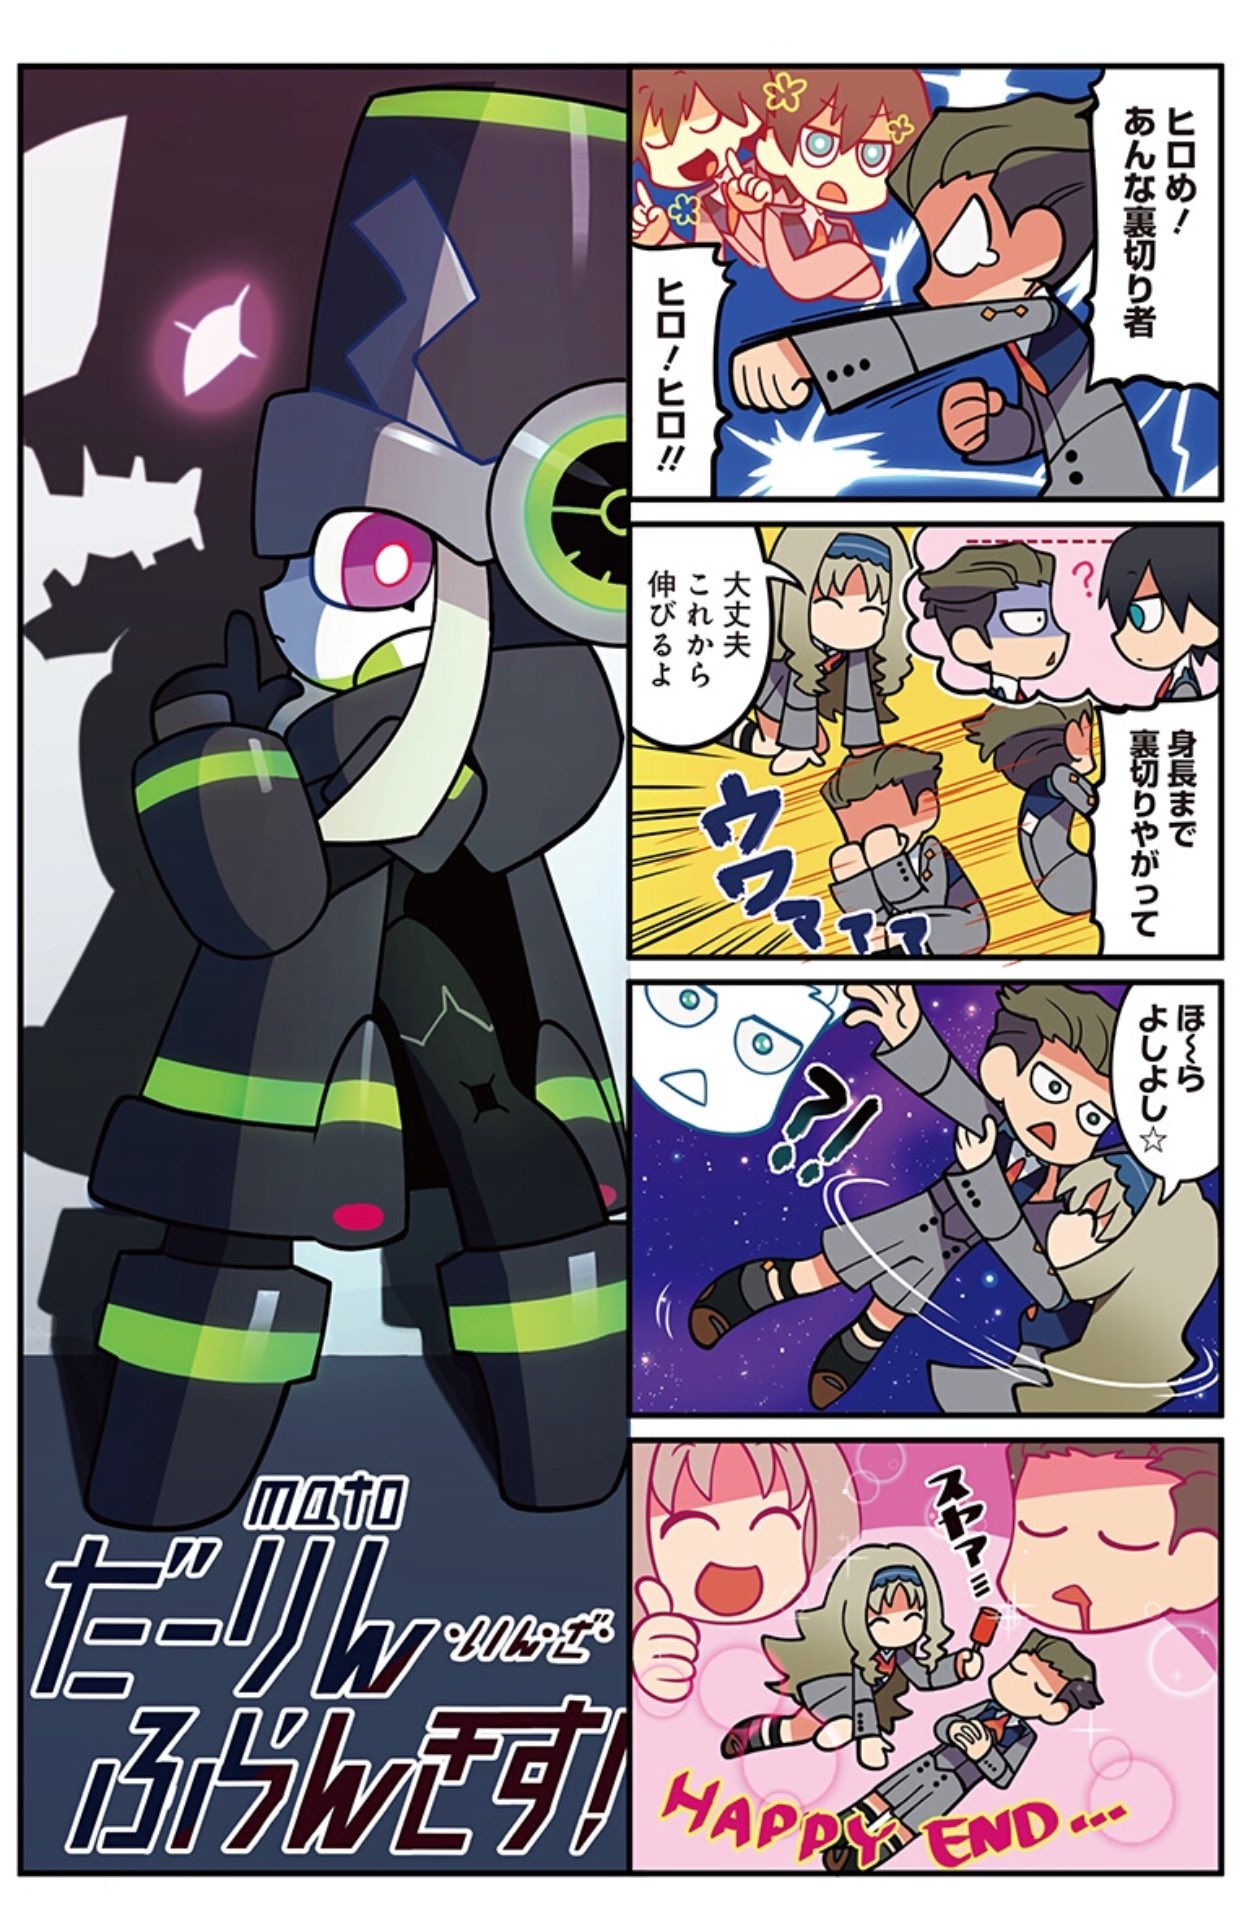 1girl 2boys 4koma ^_^ angry artist_name black_hair blue_eyes bright_pupils brown_hair closed_eyes comic copyright_name darling_in_the_franxx different_shadow genista_(darling_in_the_franxx) hair_slicked_back hairband height_conscious highres hiro_(darling_in_the_franxx) index_finger_raised kokoro_(darling_in_the_franxx) long_hair mato_(mozu_hayanie) mecha mitsuru_(darling_in_the_franxx) multiple_boys picking_up platinum_blonde punching rattle rolling sparkling_eyes star starry_background uniform violet_eyes wavy_hair